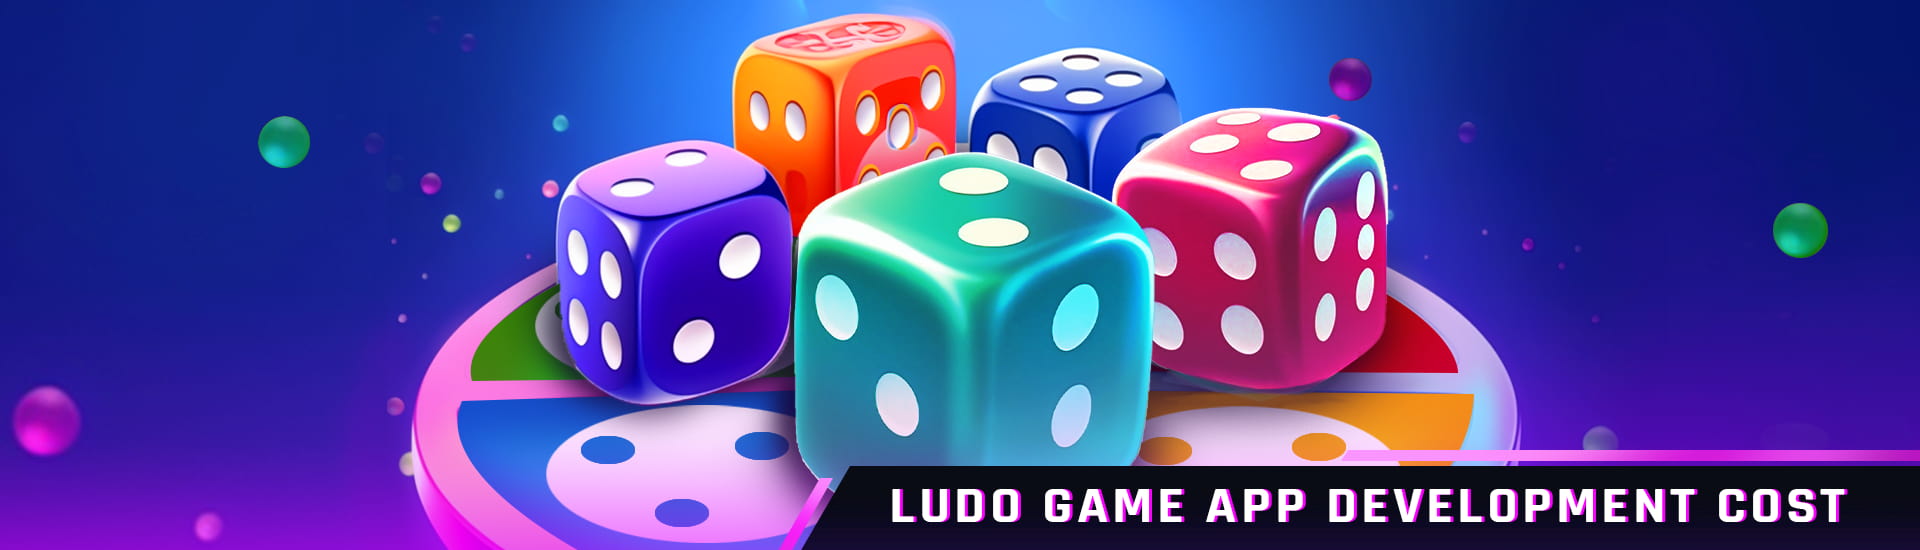 Develop online ludo multiplayer game with real money by